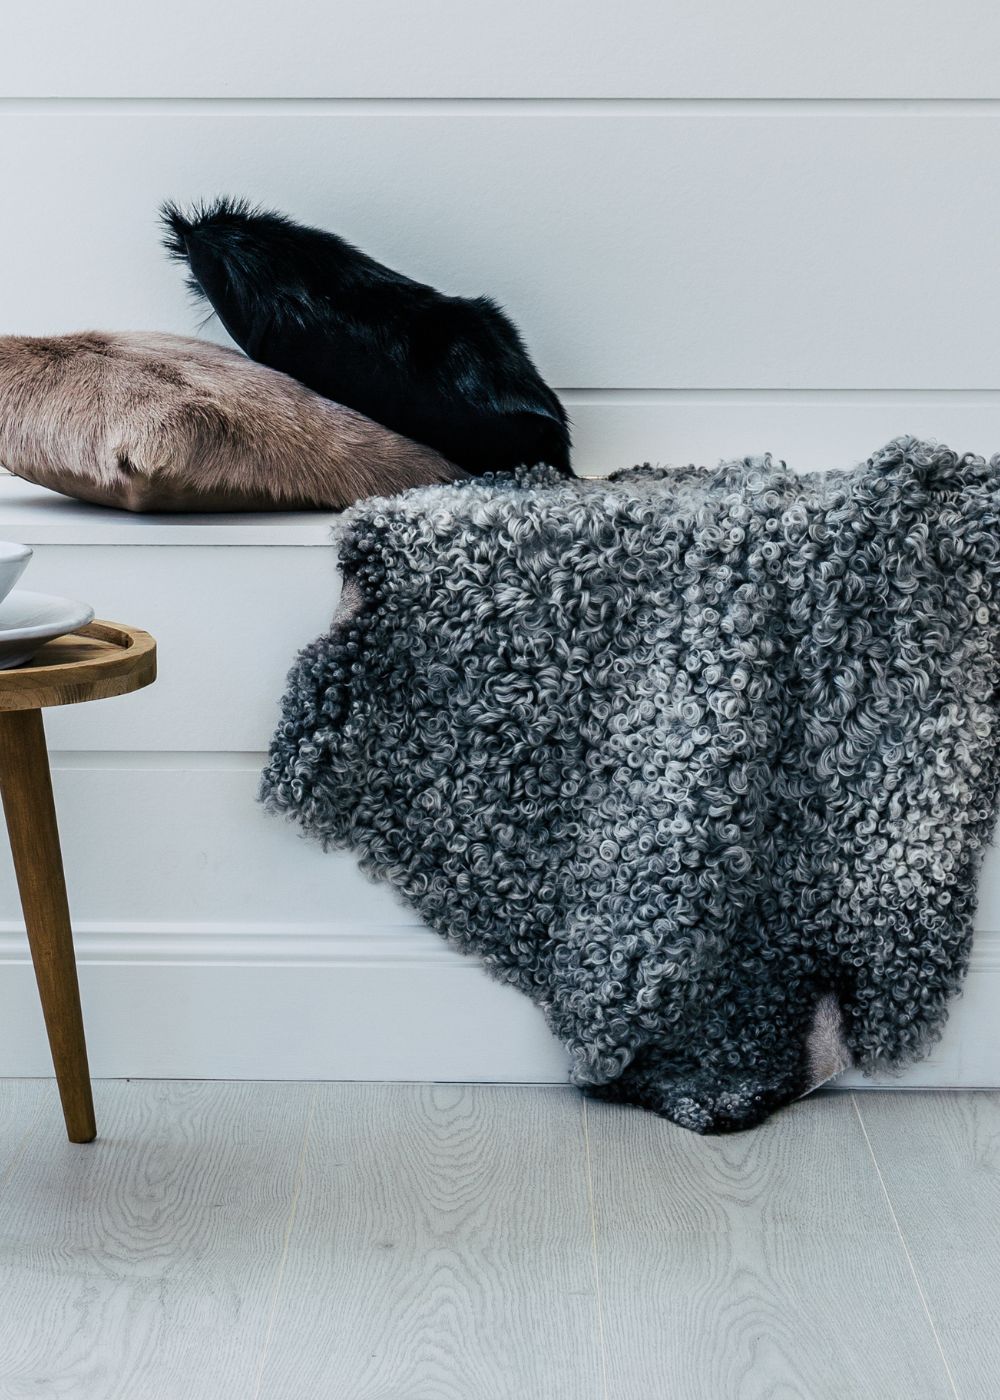 Shop Hides of Excellence luxurious animal skin throw blankets now on sale